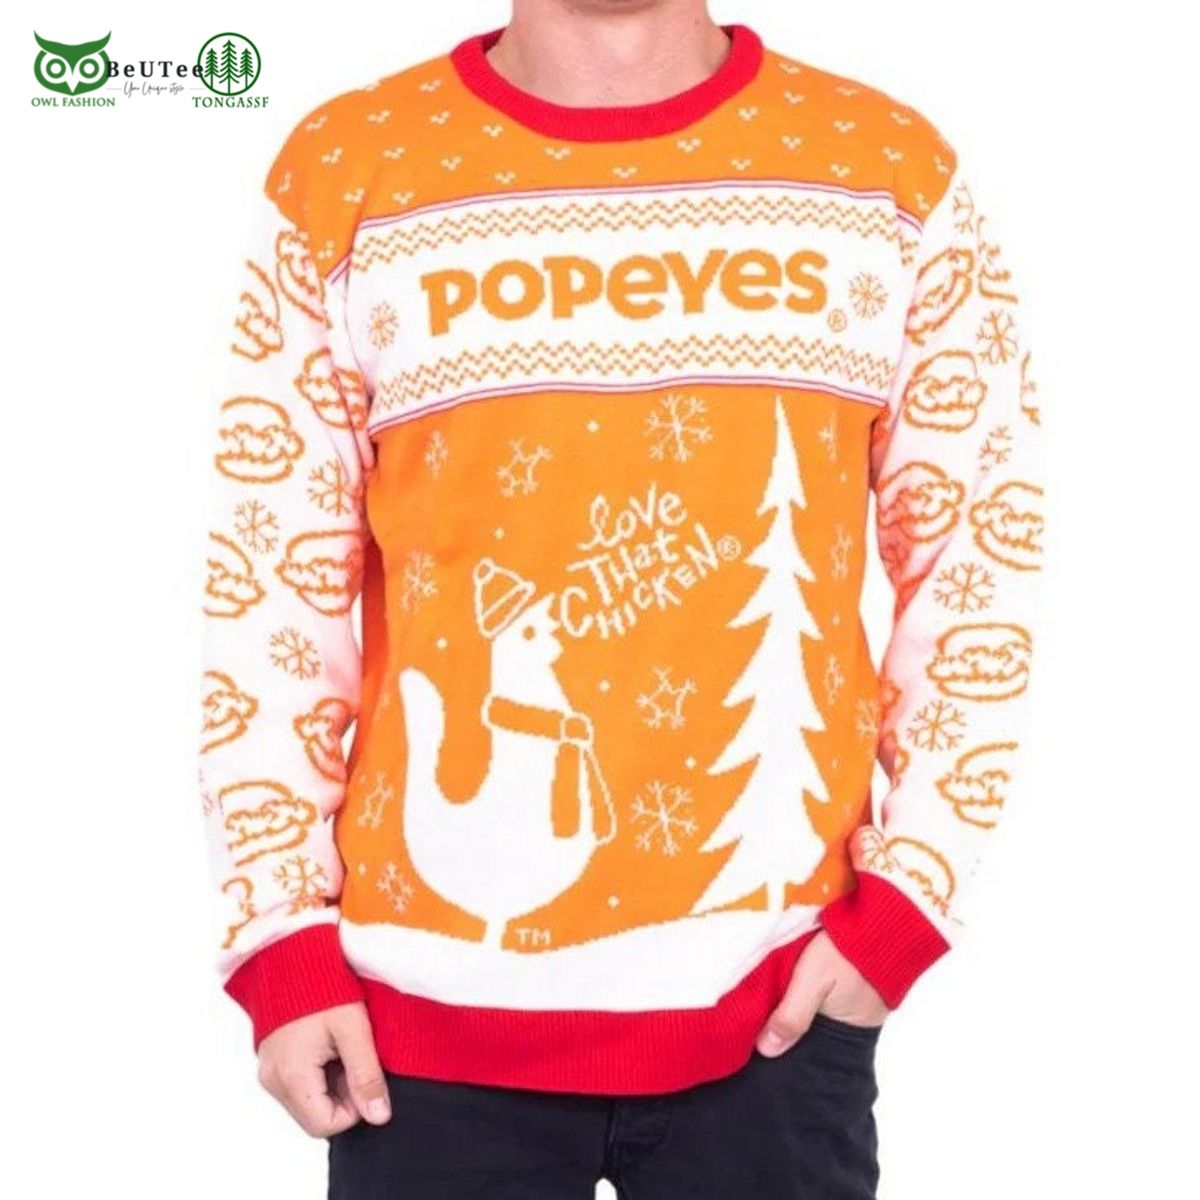 popeyes fast food love that chicken ugly christmas sweater 1 QMOod